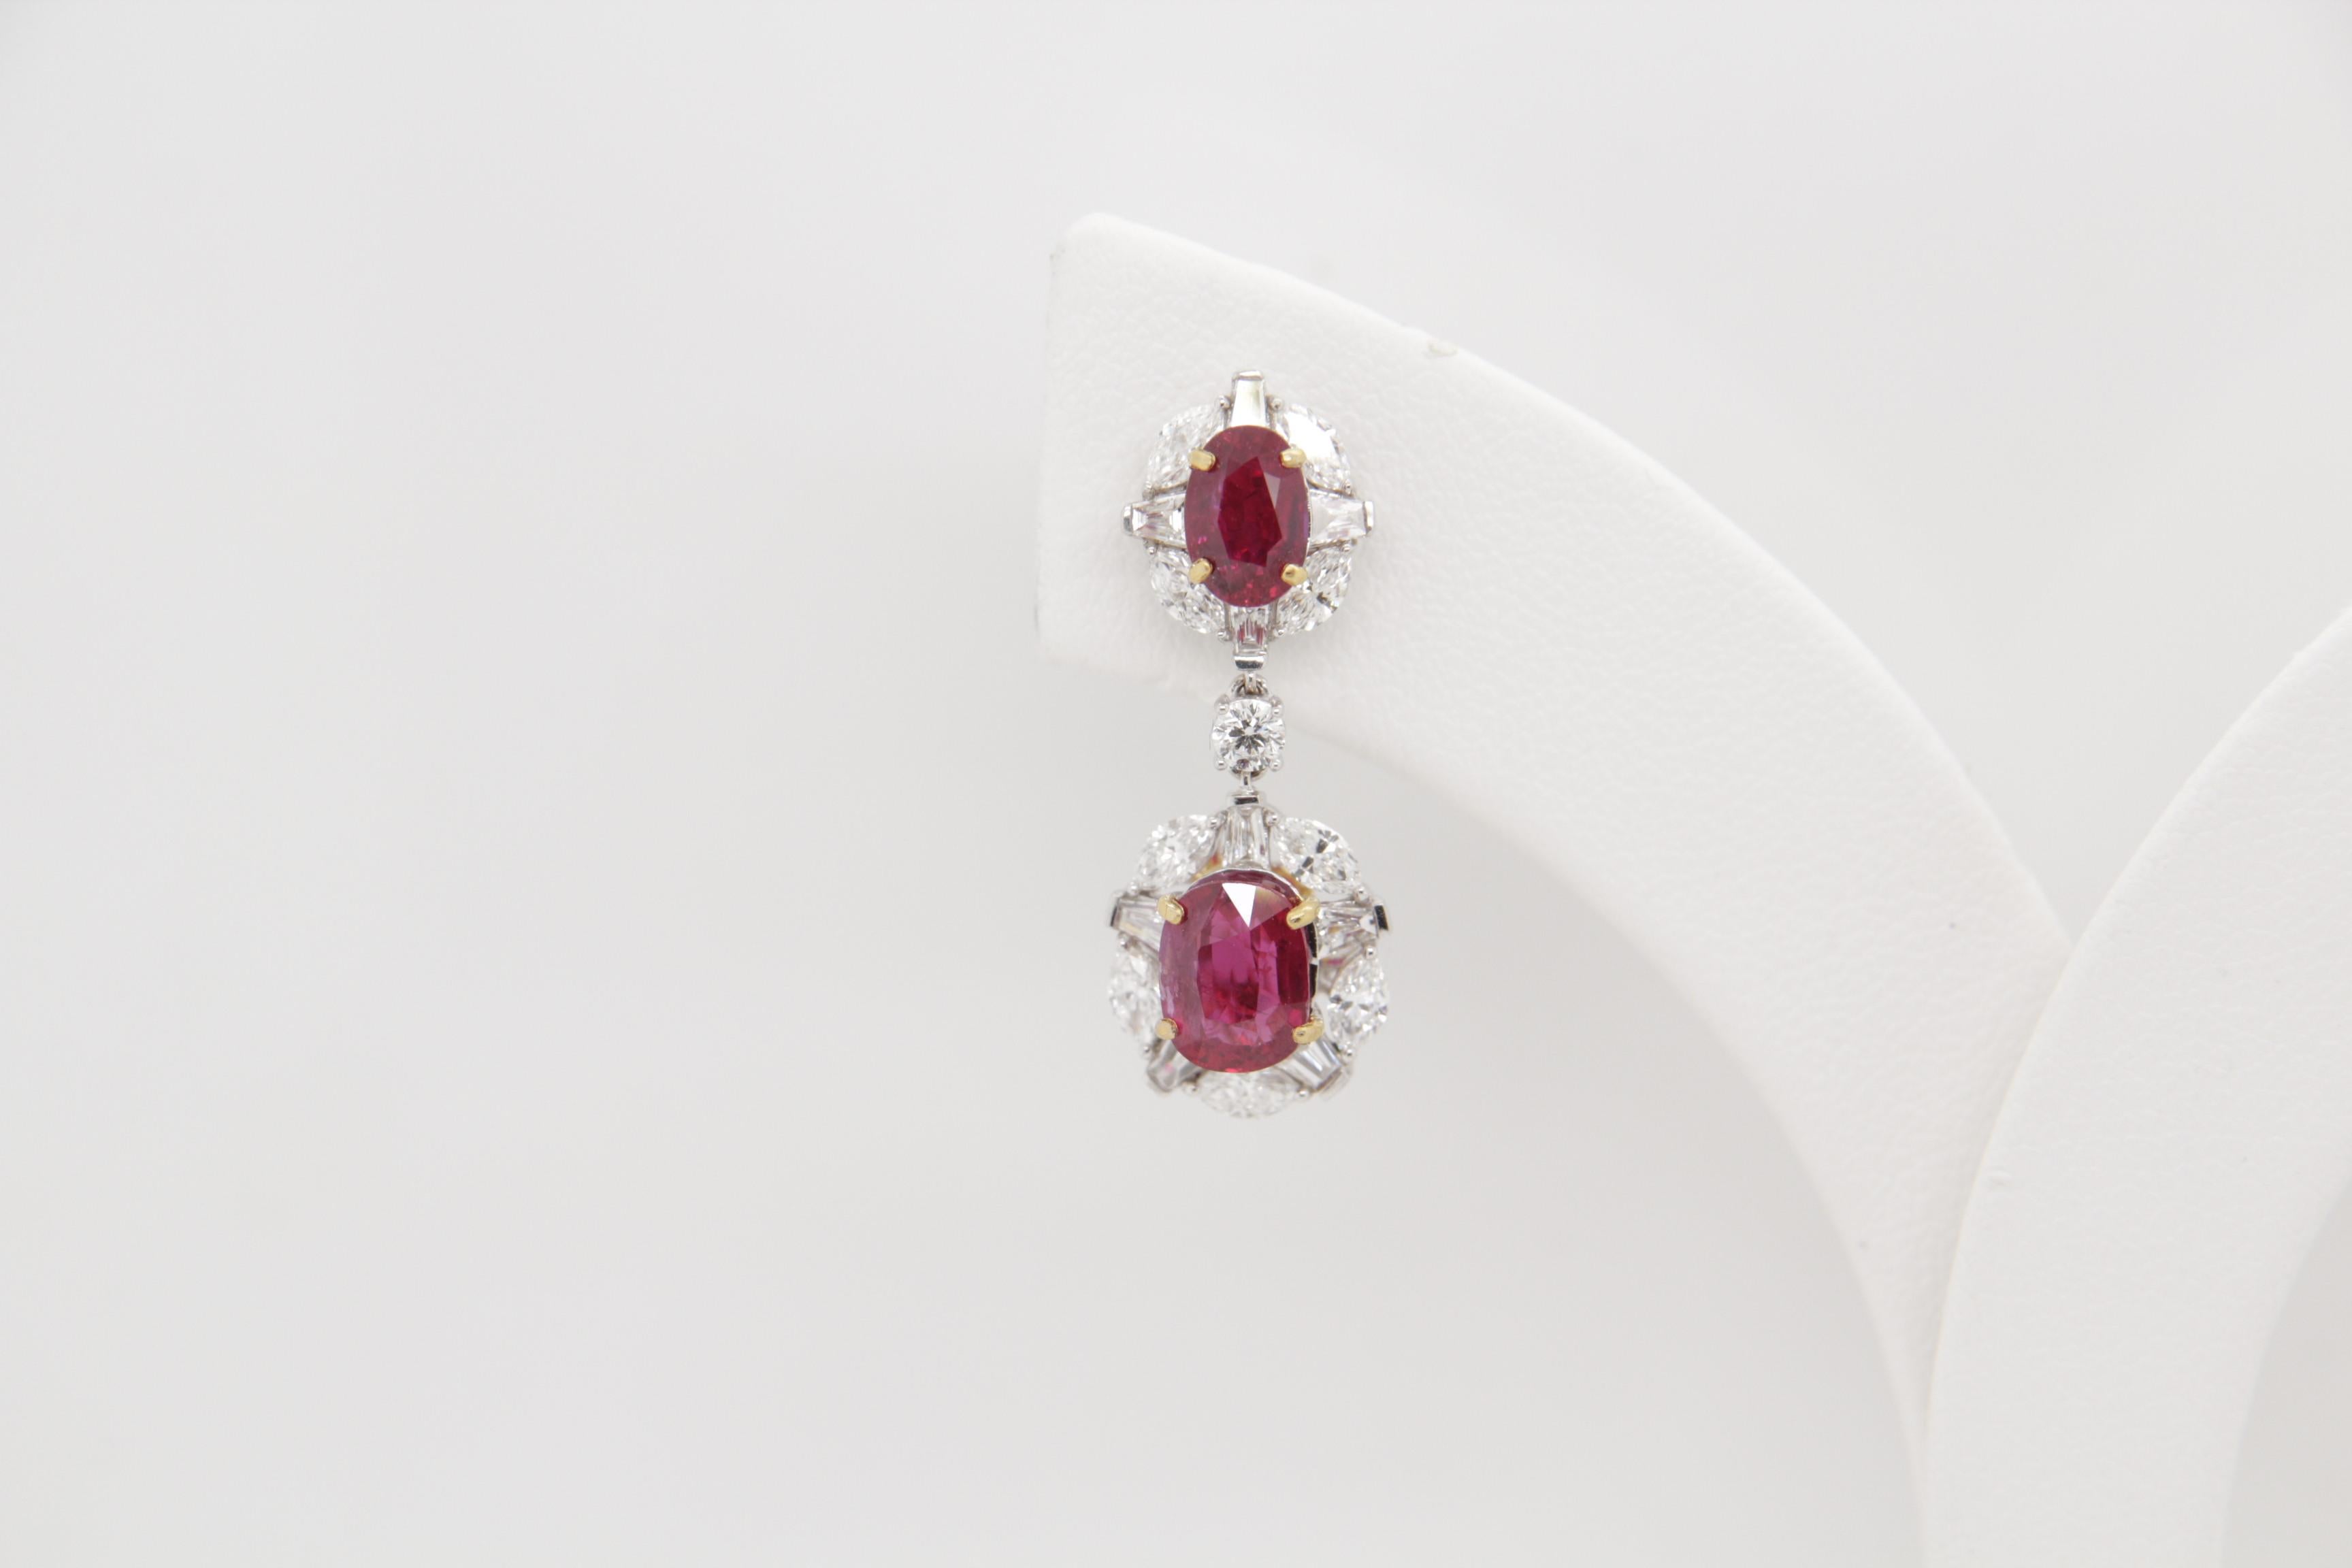 An eye catching pair of vibrant and rare Burmese ruby and diamond earrings. The ruby's shining lustre is complimented by the sparkling diamonds, this showcases the elegance of the piece . This rare piece will not only help to exude confidence and